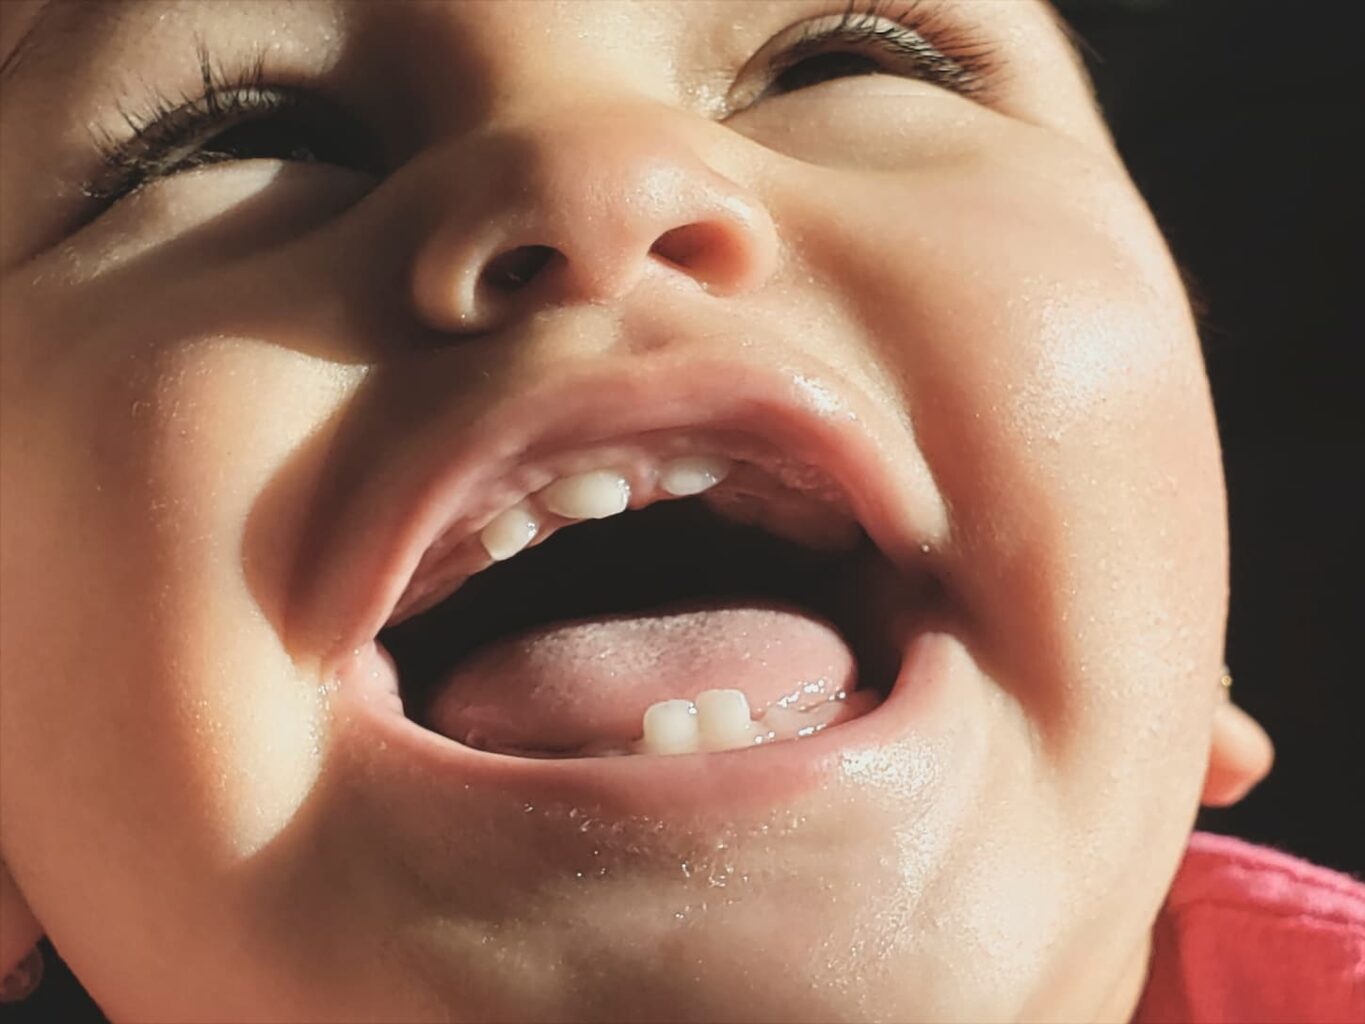 An image of a baby girl laughing hysterically showing her newly acquired teeth in the process.